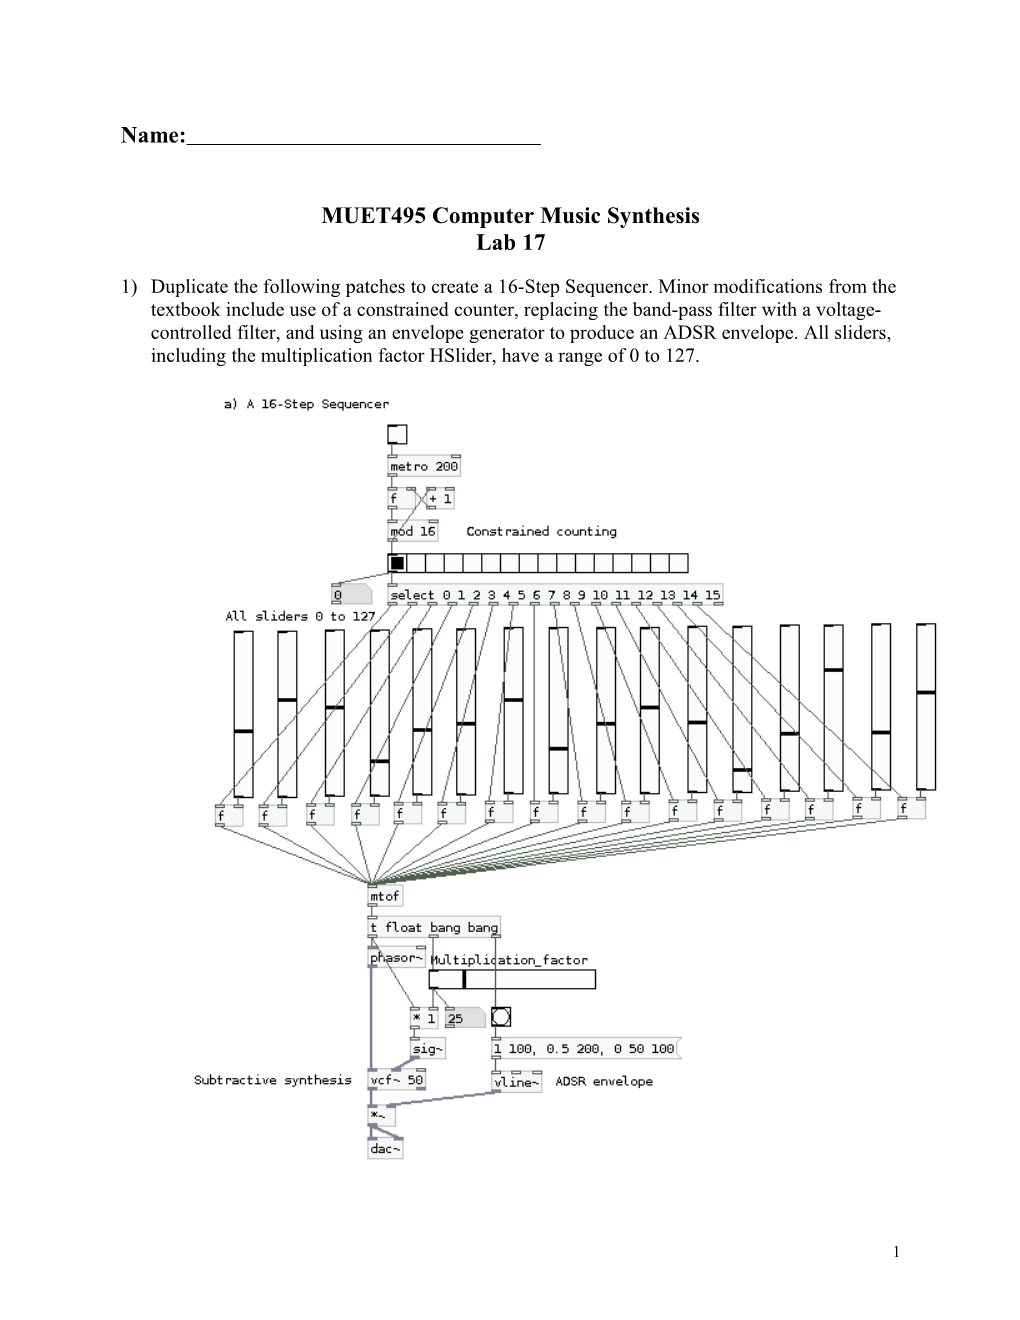 MUET495 Computer Music Synthesis